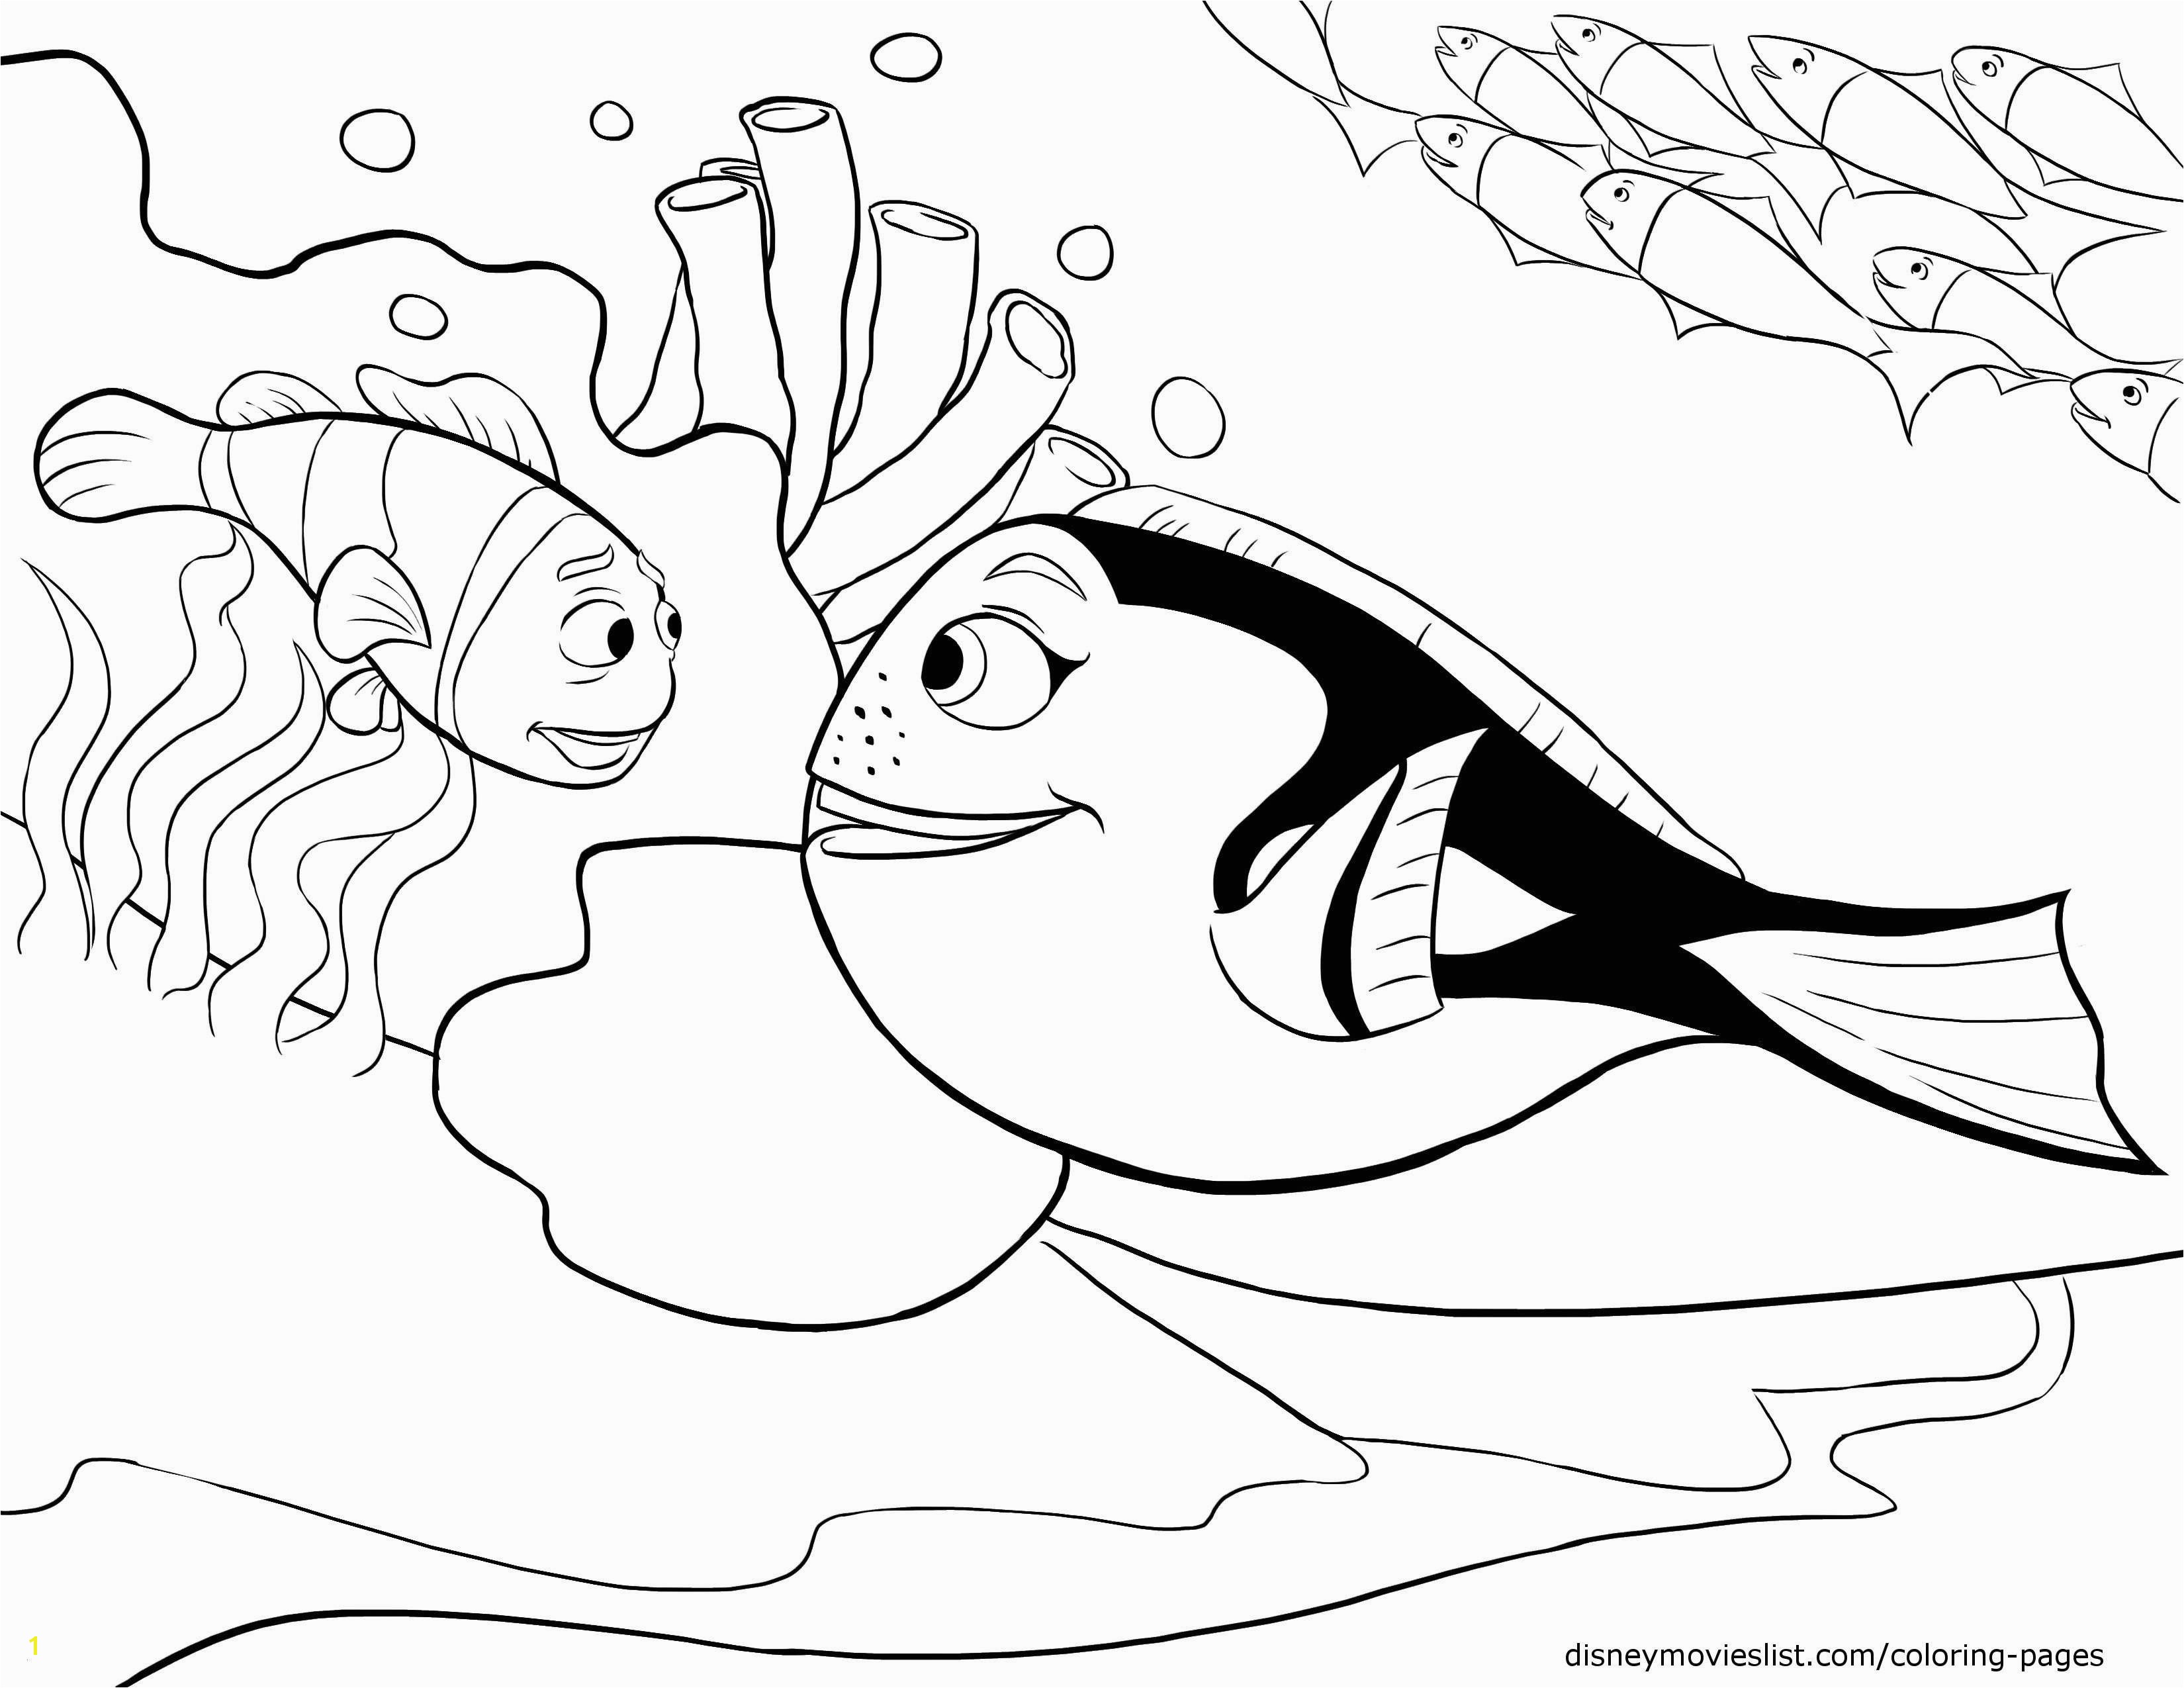 Fining Nemo Coloring Pages Groundhog Free Coloring Pages Nemo Coloring Pages Beautiful Finding Nemo Coloring Pages